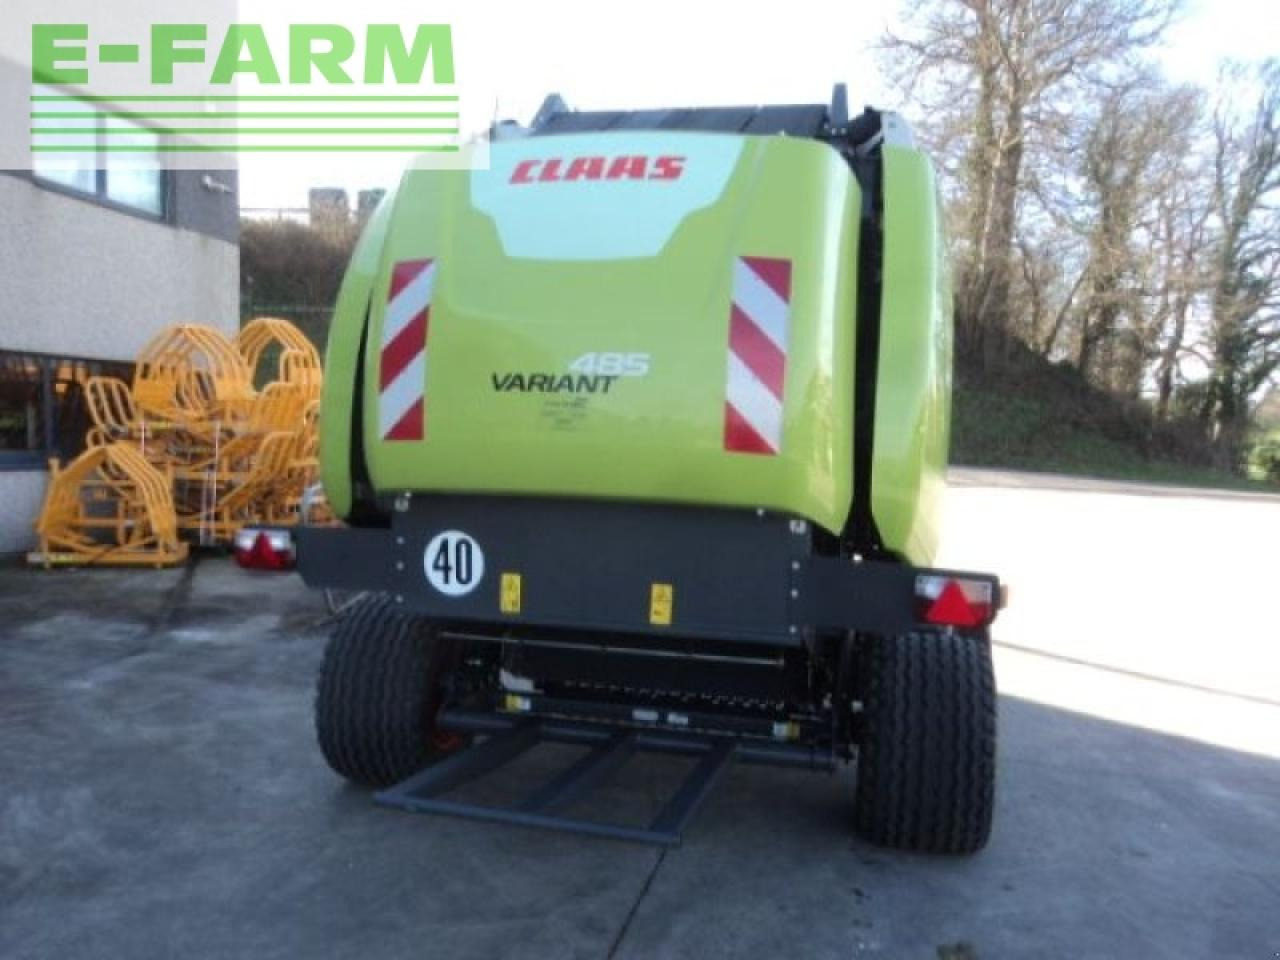 Tractor CLAAS variant 485 rc